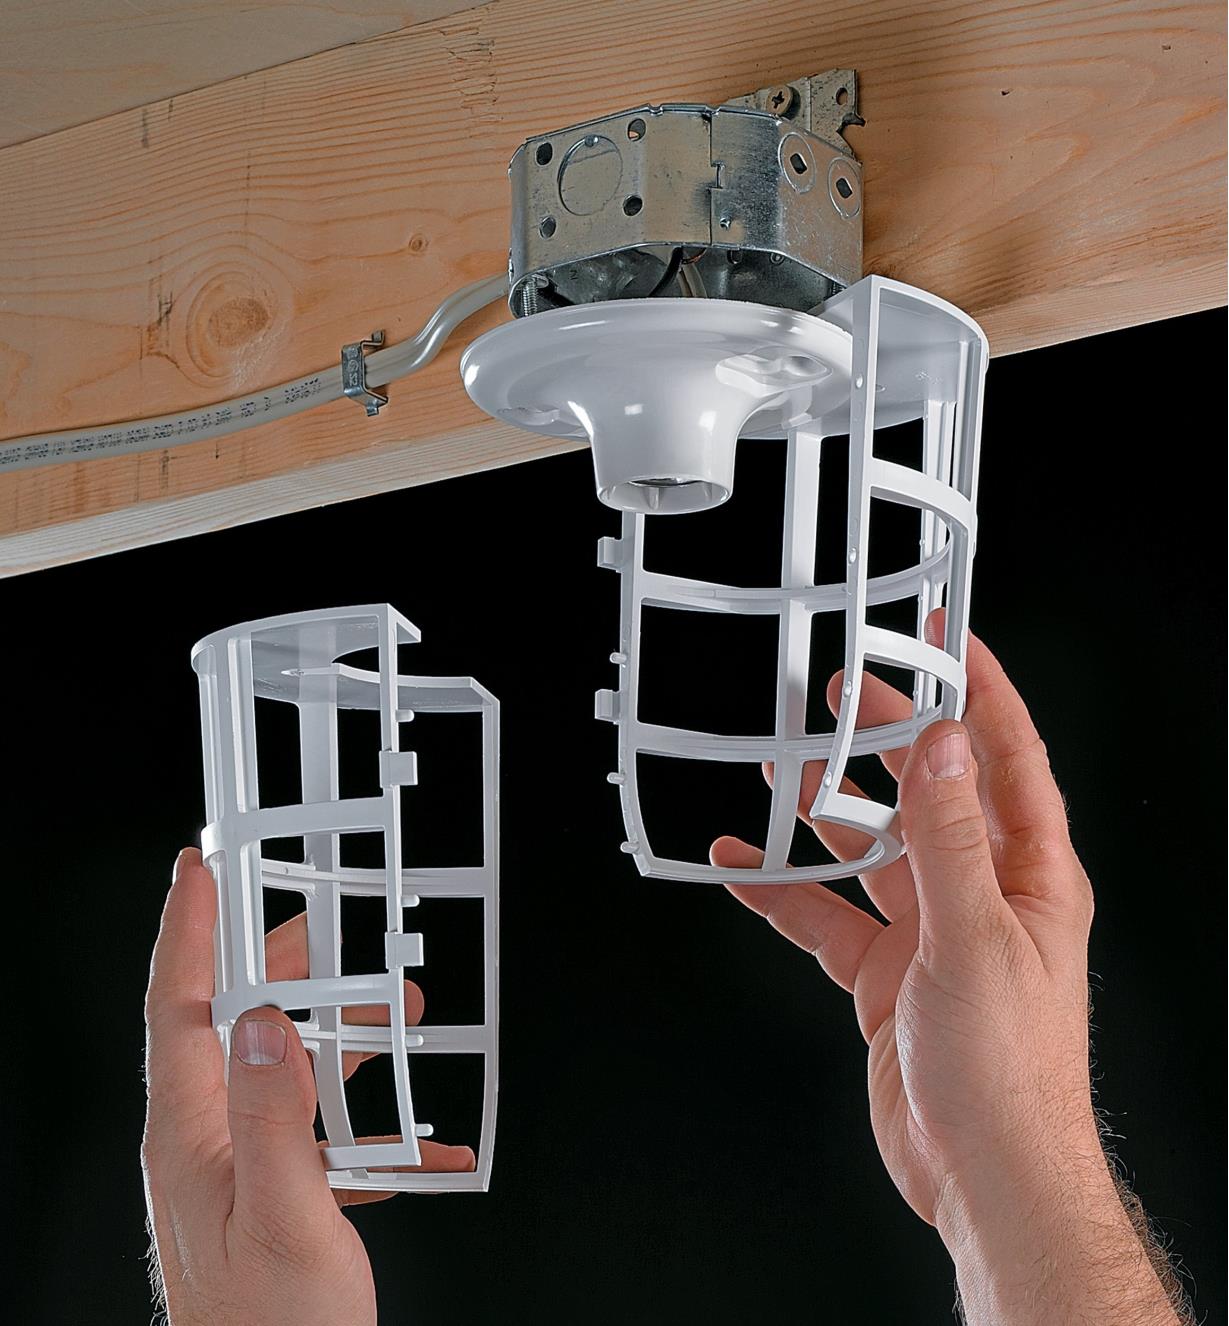 Separating the two halves of the light bulb cage in order to change the lightbulb